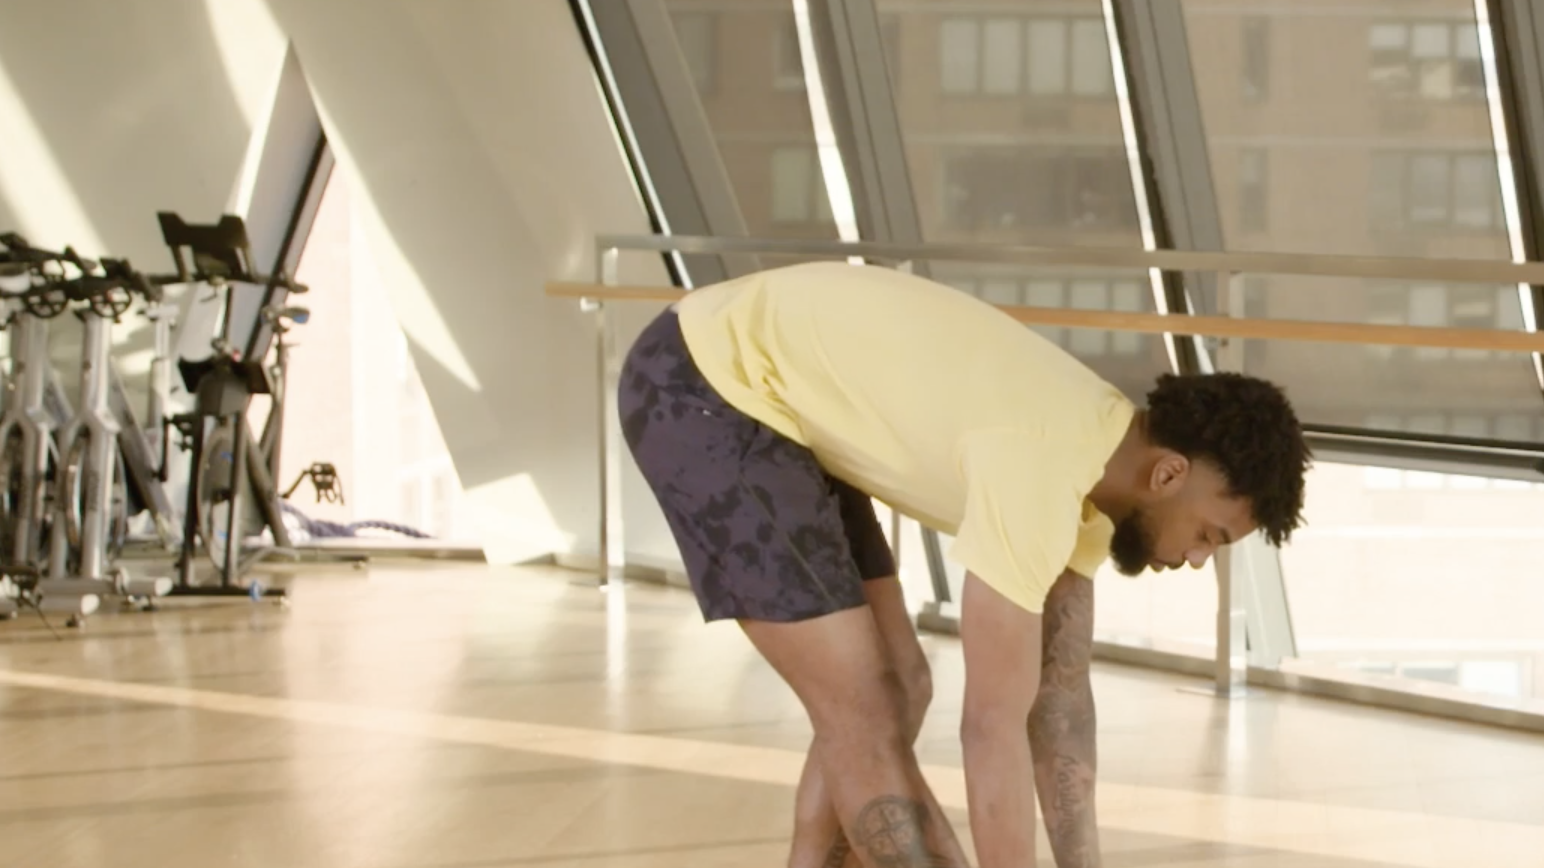 The single straight leg stretch stretches the hamstrings and